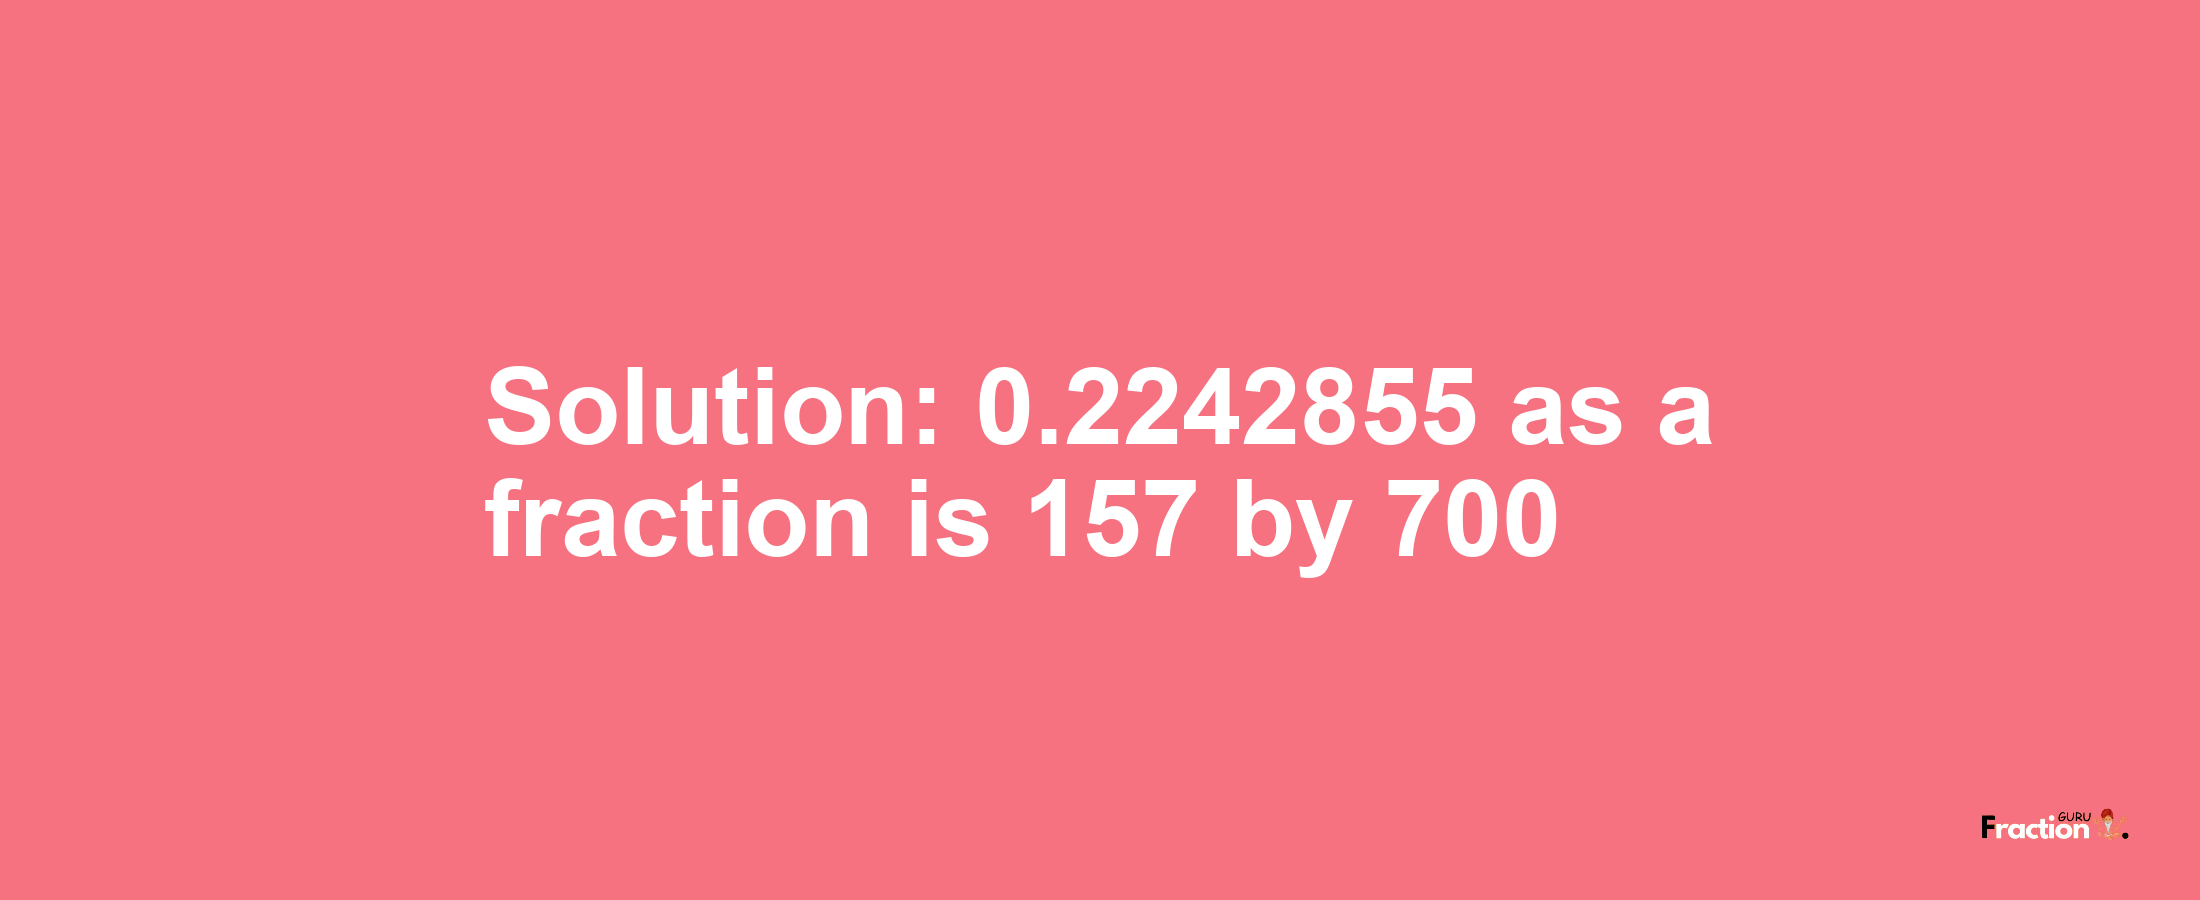 Solution:0.2242855 as a fraction is 157/700